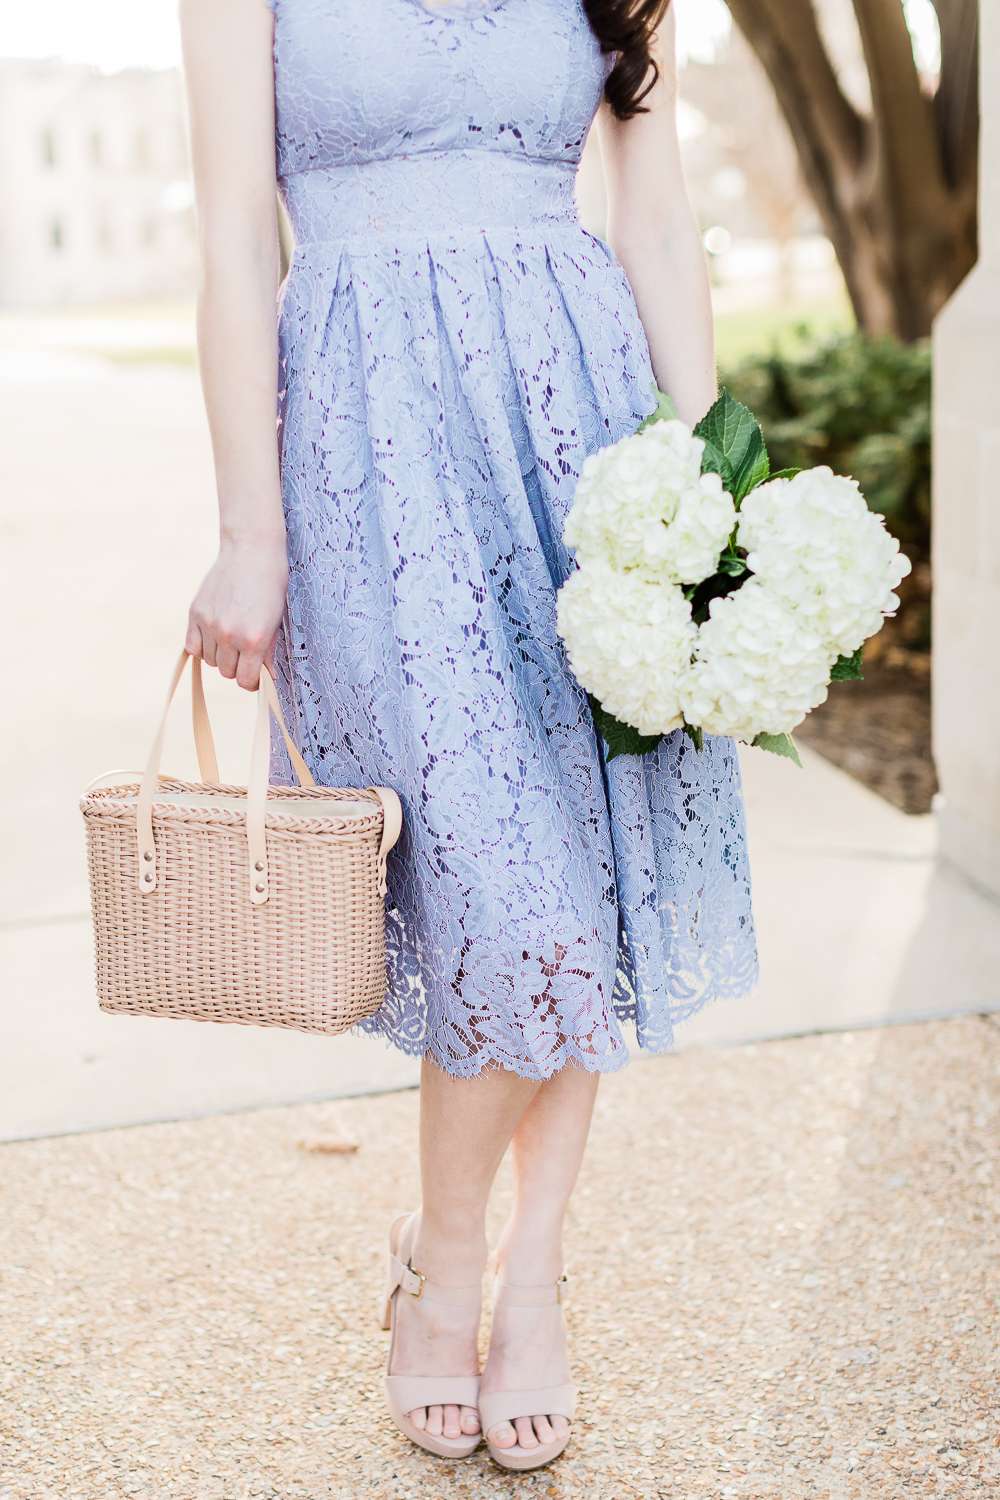 Color Crush: The Lilac Lace Dress I'm Wearing on Repeat This Spring by popular affordable fashion blogger Stephanie Ziajka from Diary of a Debutante, Chicwish lilac lace cami dress, Sugarfix by Baublebar lilac tassel drop earrings, Who What Wear Basket Crossbody Bag, what to wear to a spring wedding, spring wedding guest dress ideas